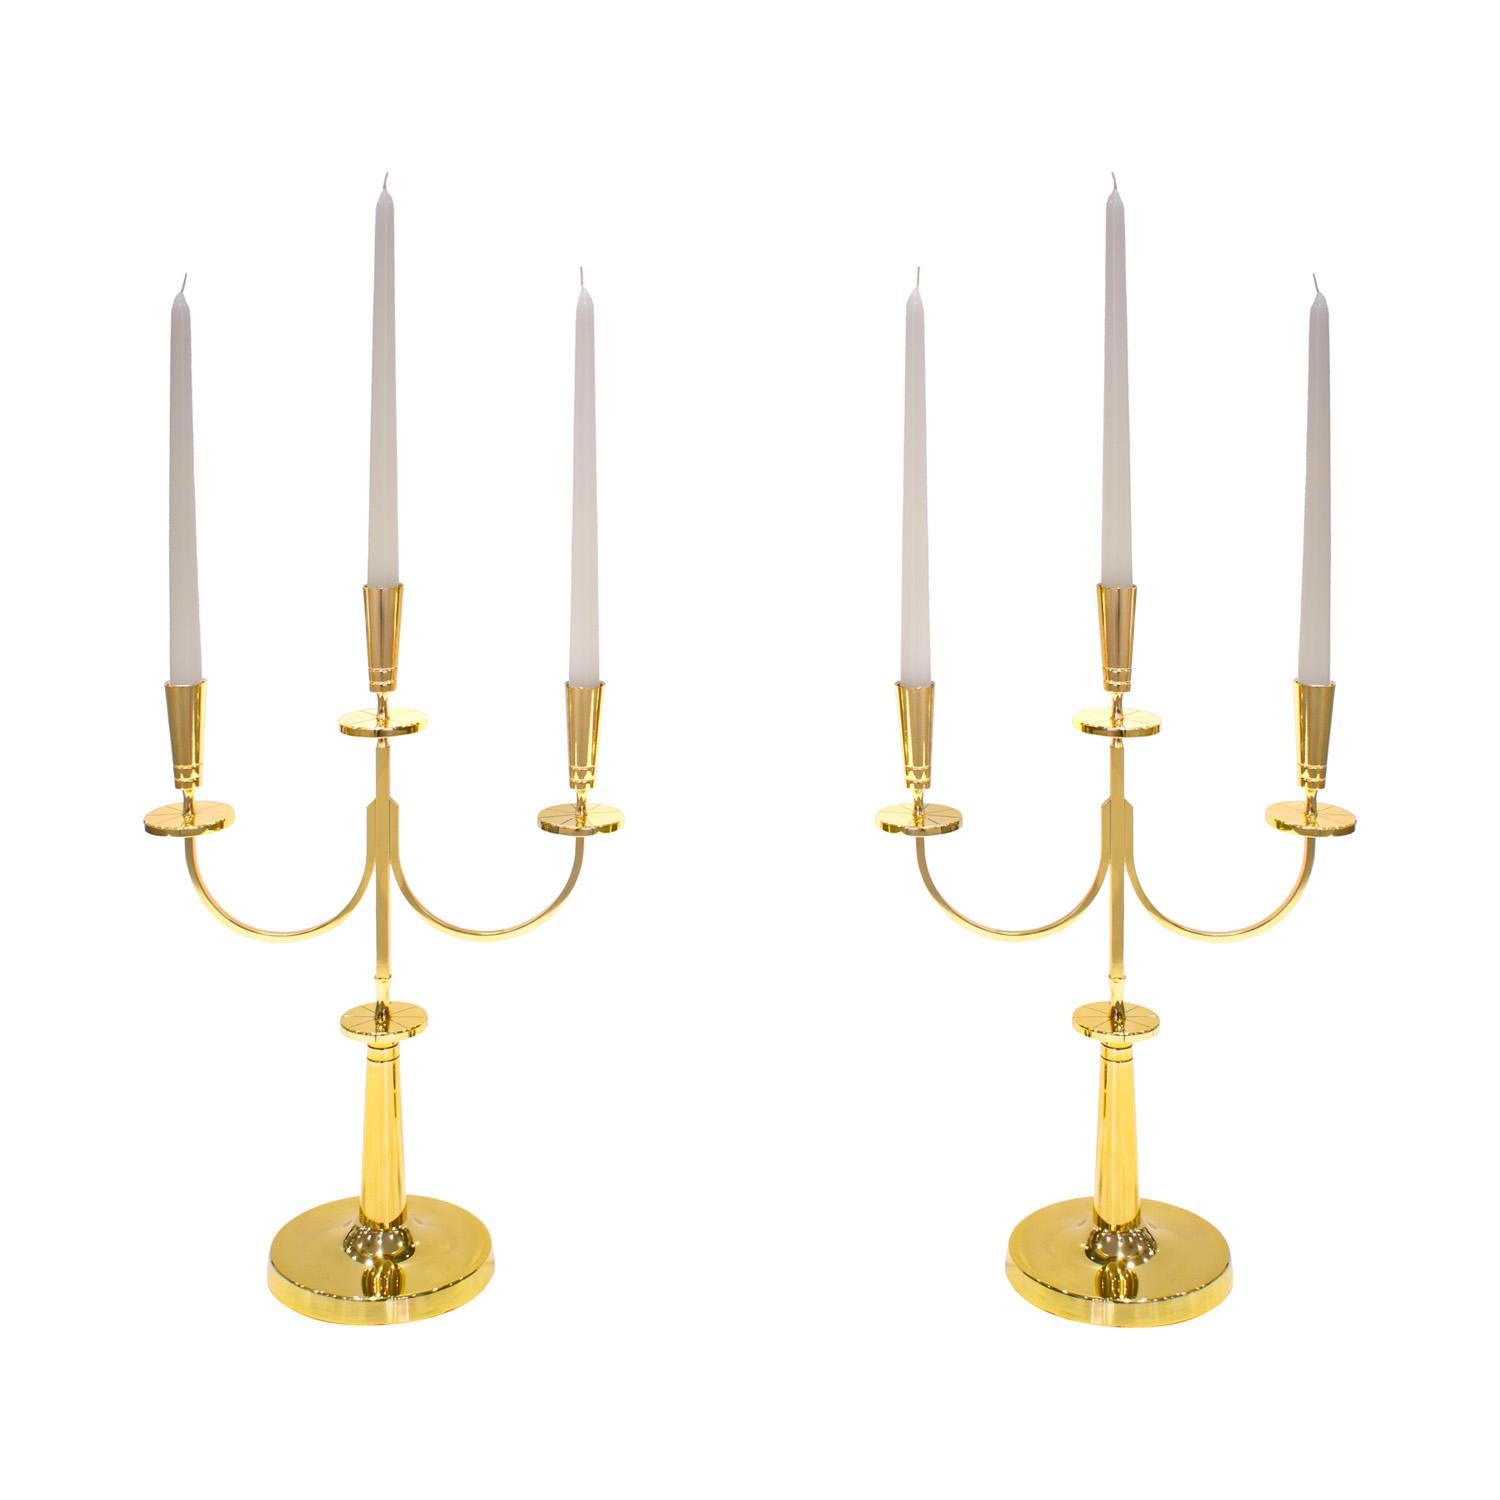 Pair of elegant three stick candelabra in polished brass by Tommi Parzinger for Dorlyn Silversmiths, American 1950's (signed on bases “Dorlyn Silversmiths”). Each engraved with Parzinger’s iconic radiating lines. Newly polished and lacquered by